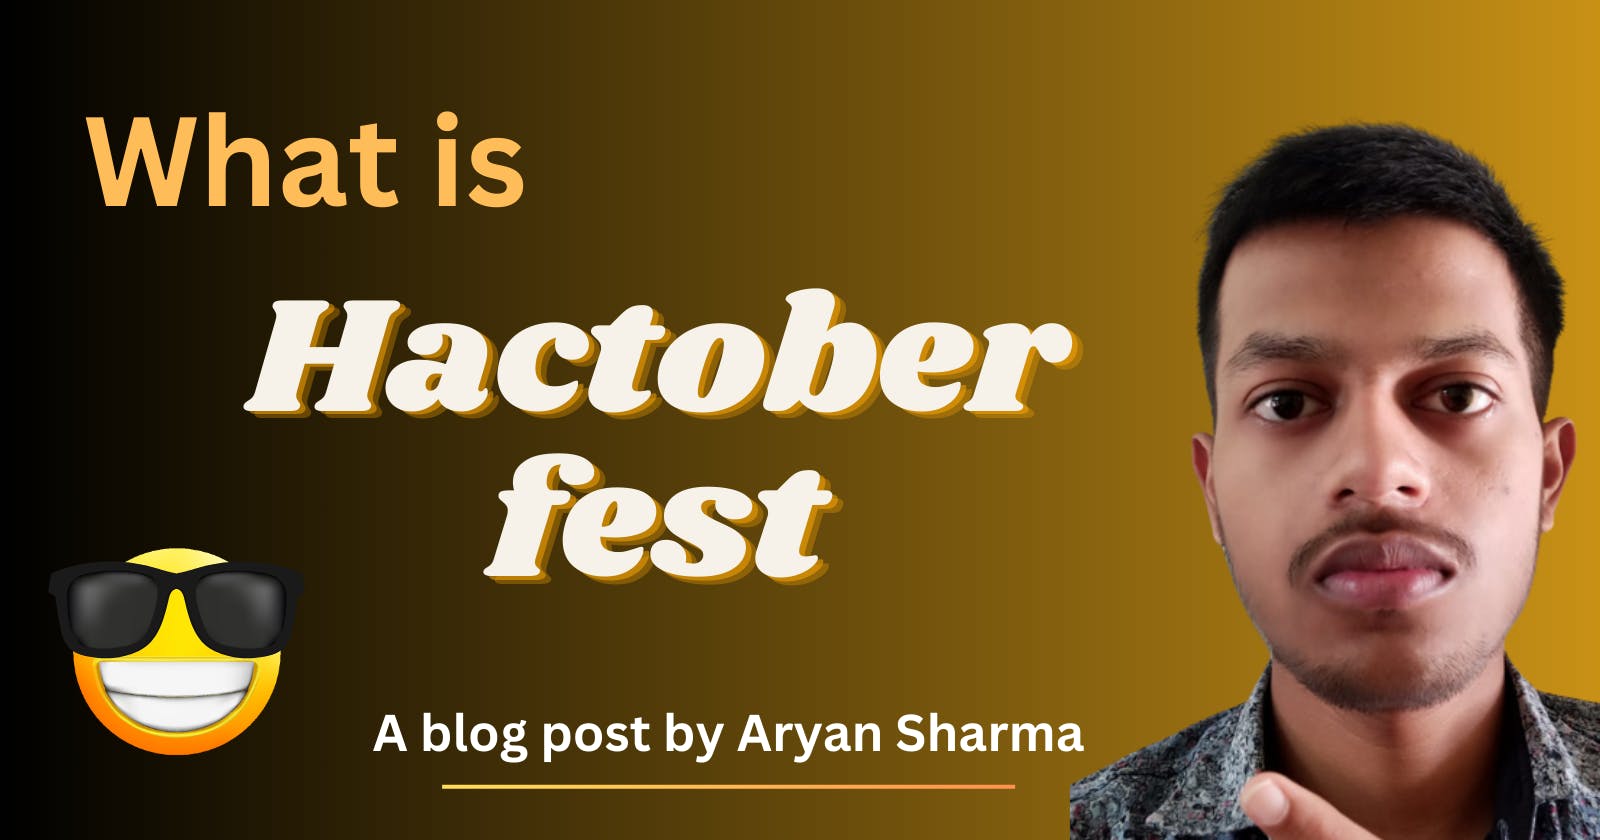 HactoberFest | Hacktoberfest 101: Everything You Need to Know